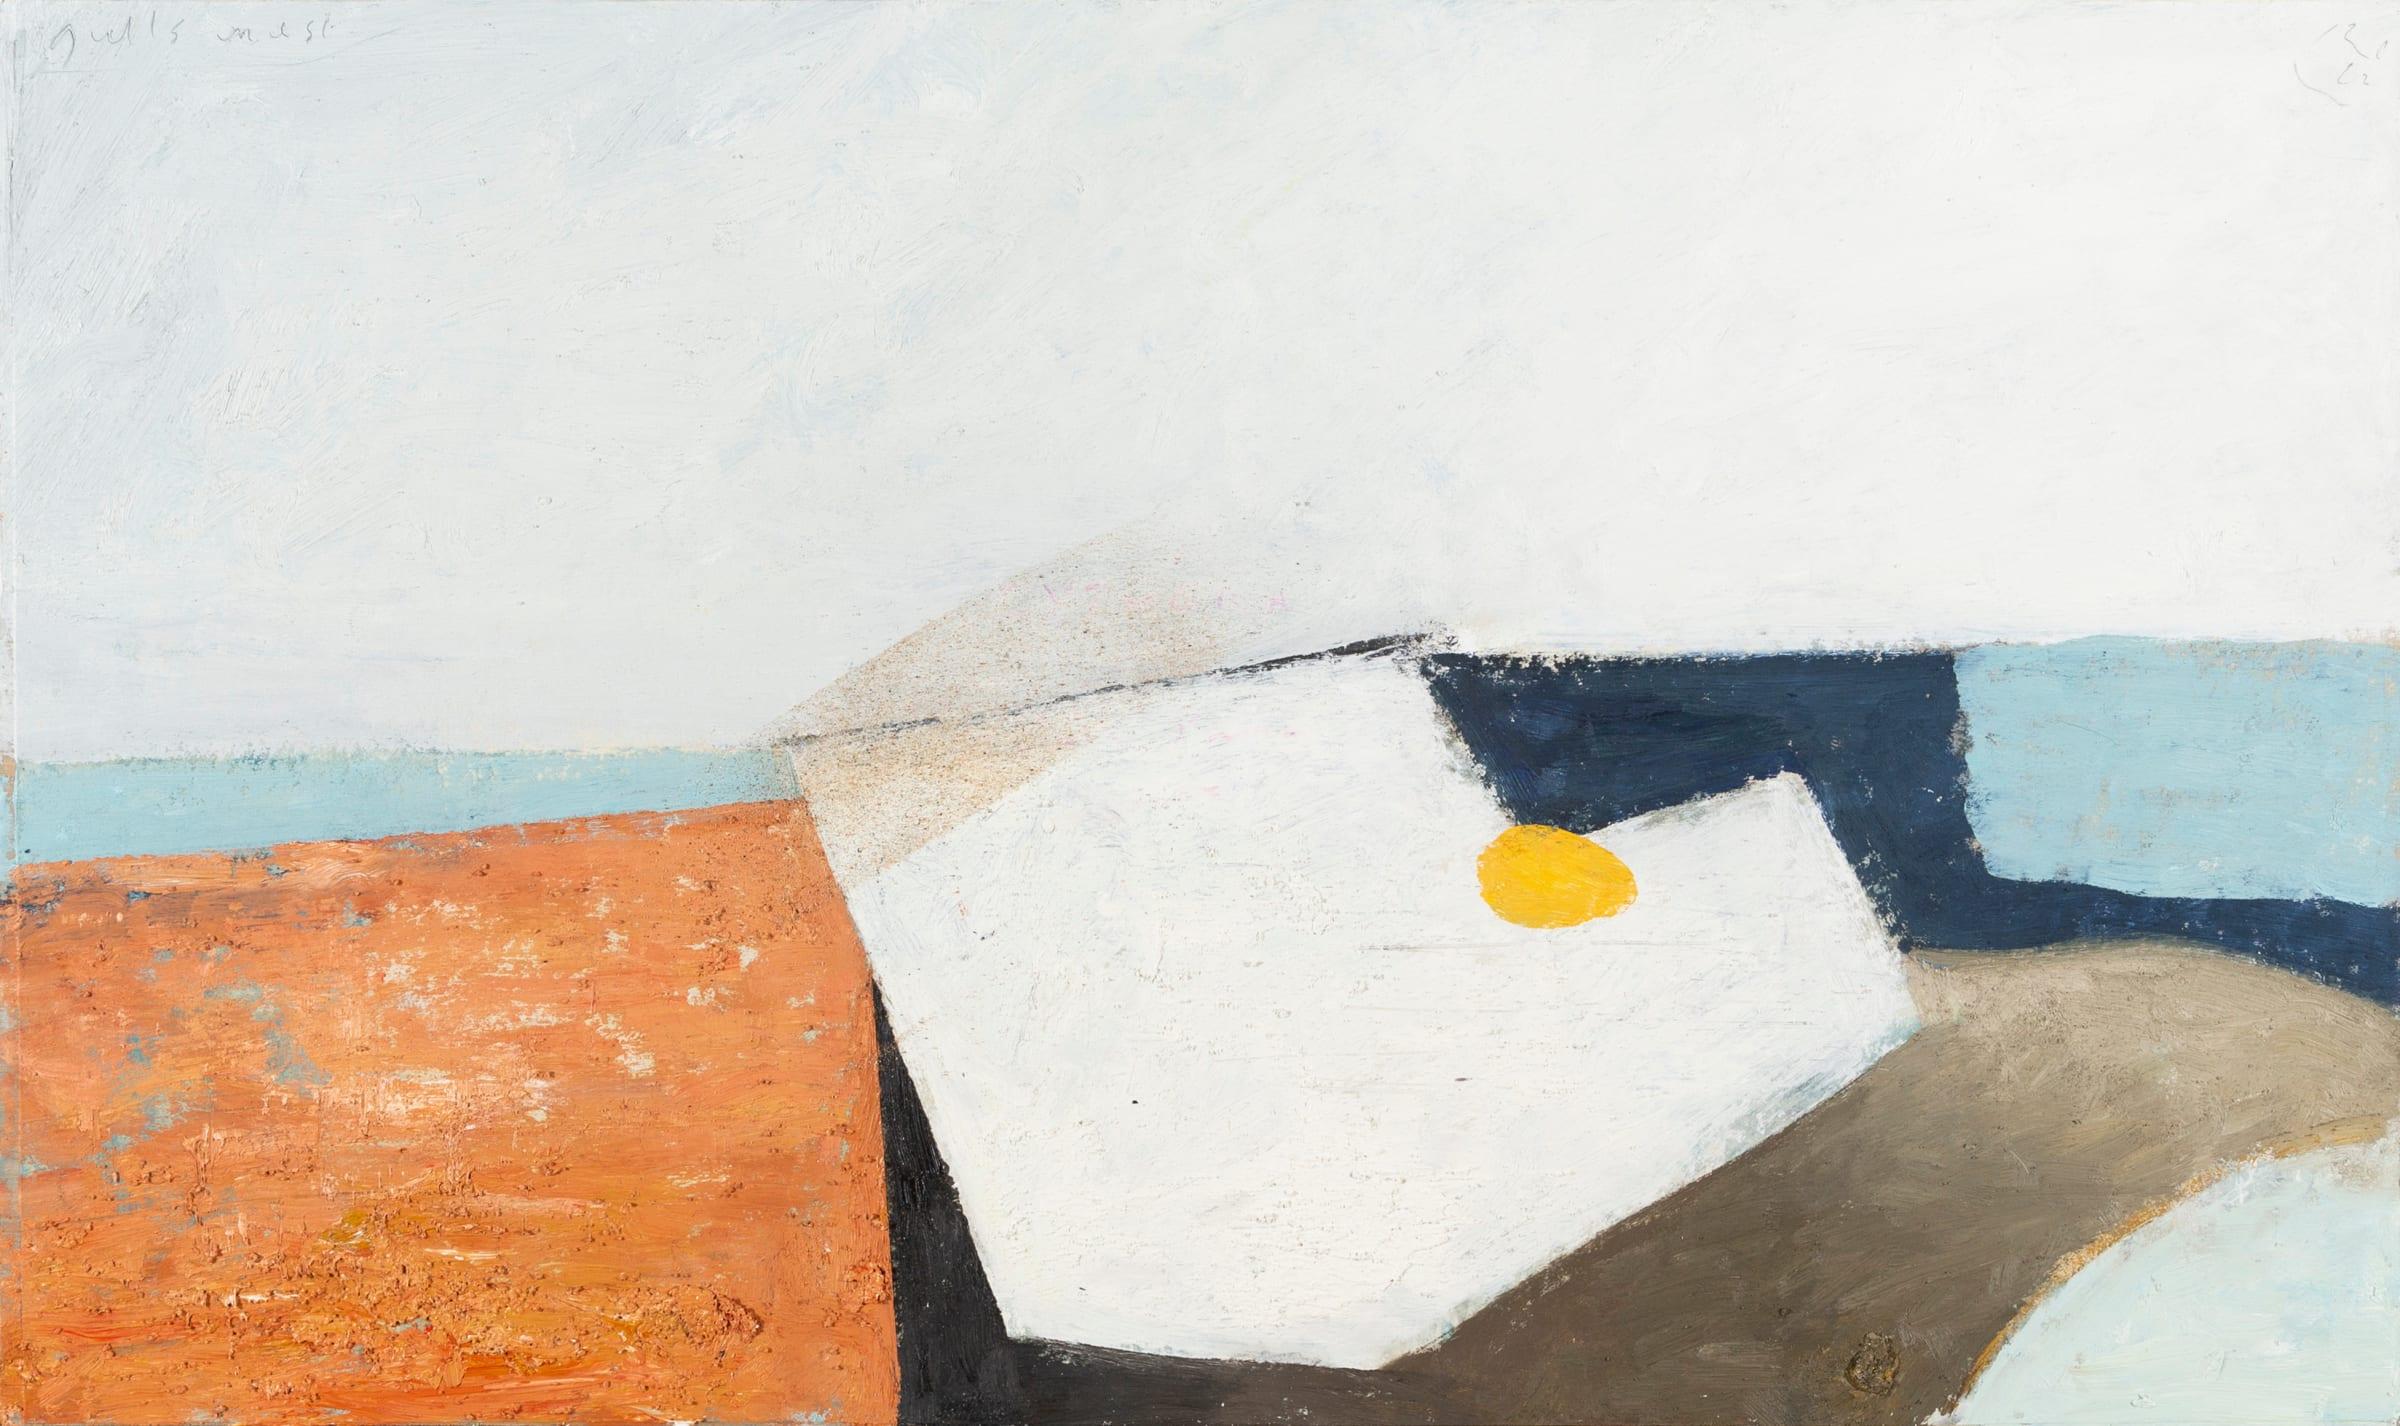 Gull's Nest, Oil on Panel Painting by Keith Purser B. 1944, 2022

Additional information:
Medium: Oil with sand on panel
Dimensions: 45.5 x 77 cm
17 7/8 x 30 1/4 in
Signed, titled and dated

Keith Purser lives and works on the edge of the